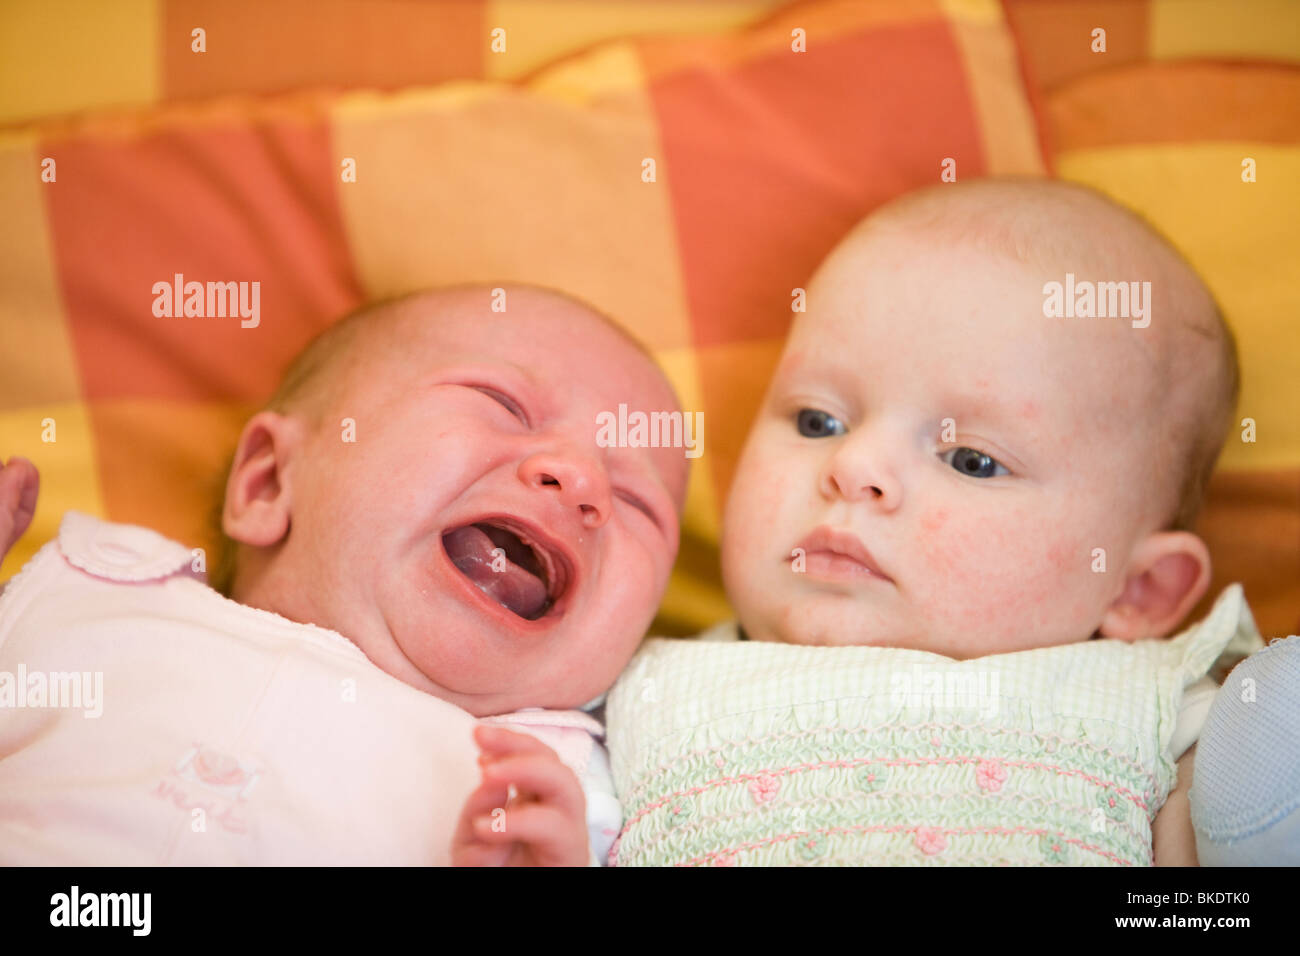 A baby crying Stock Photo